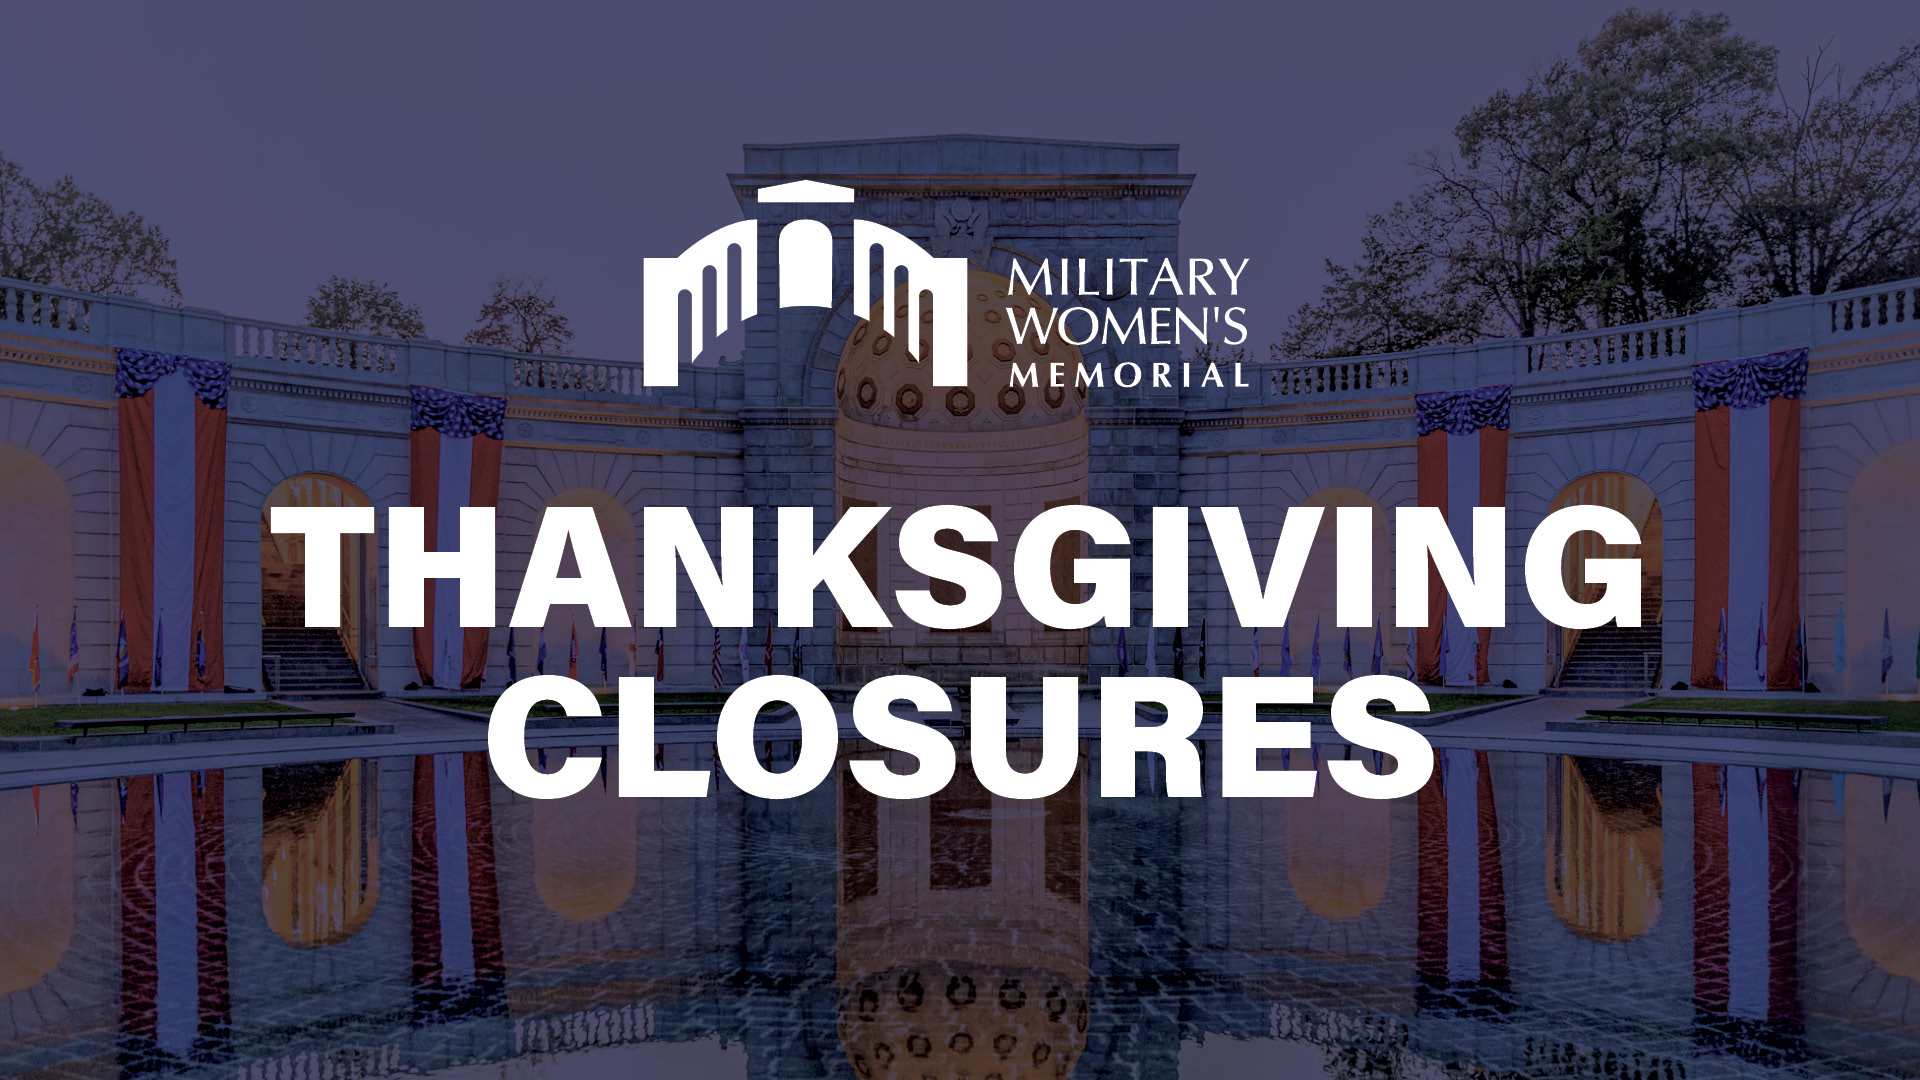 Thanksgiving Closures on a blue background